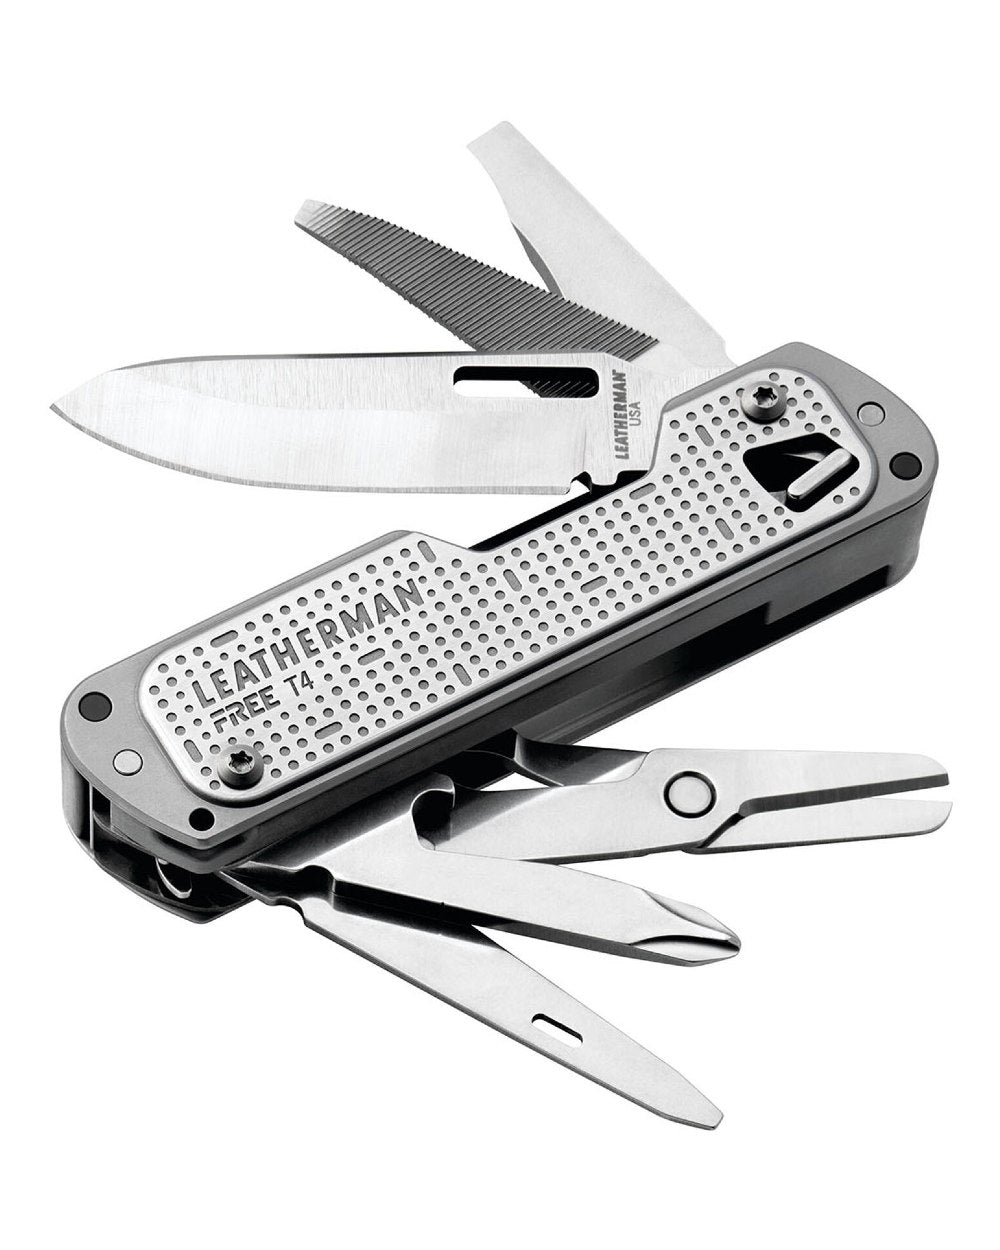 Stainless Steel Coloured Leatherman Free T4 Multi-Tool On A White Background 